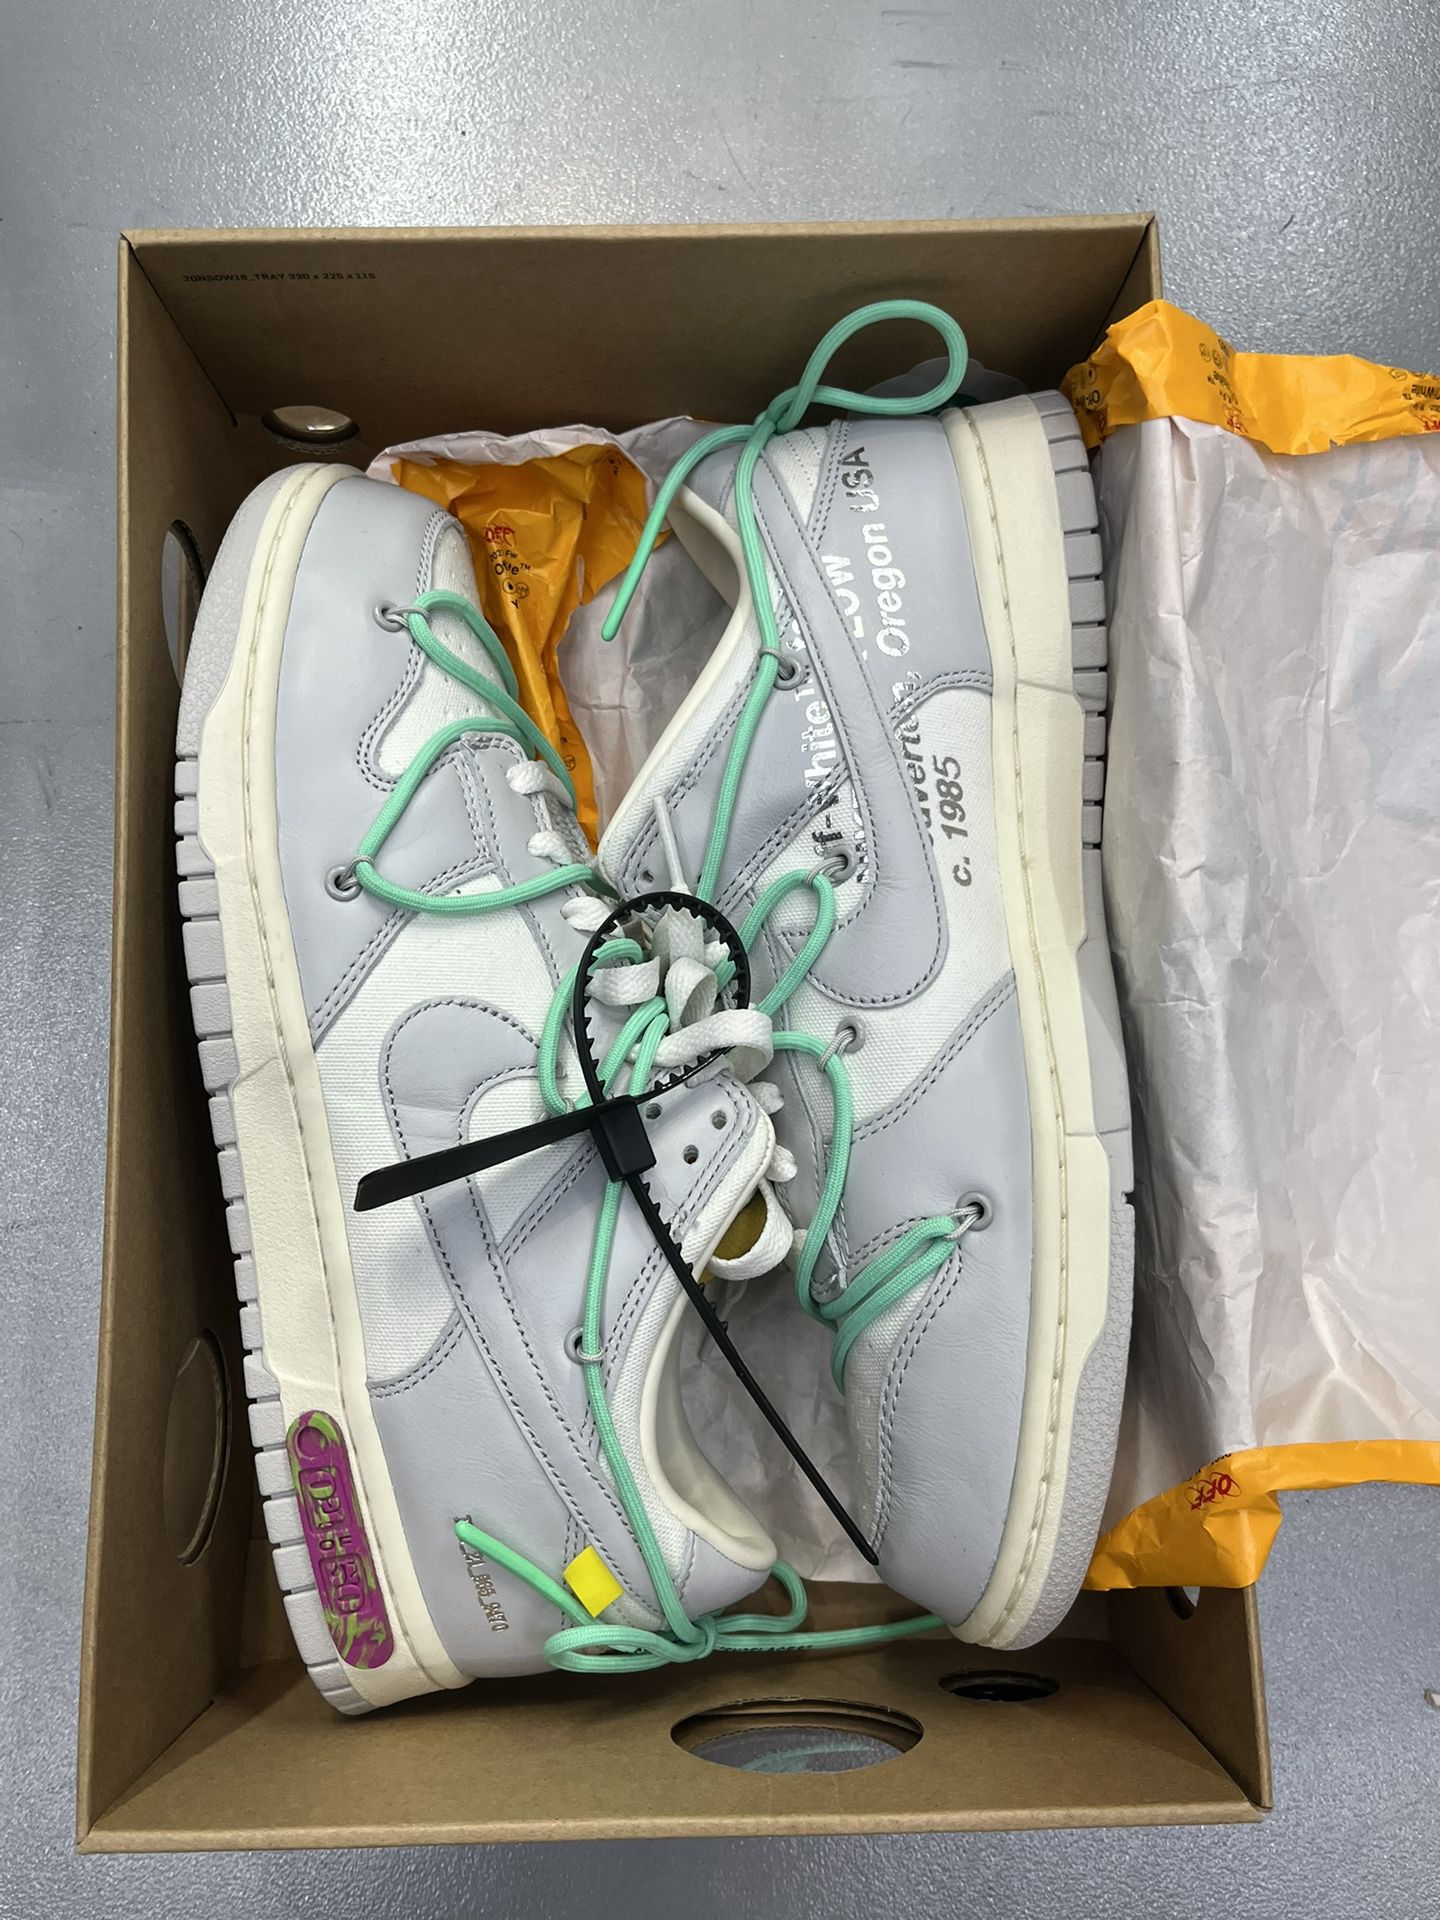 Nike Dunk Low X Offwhite Lote “4” Size 10.5us New  